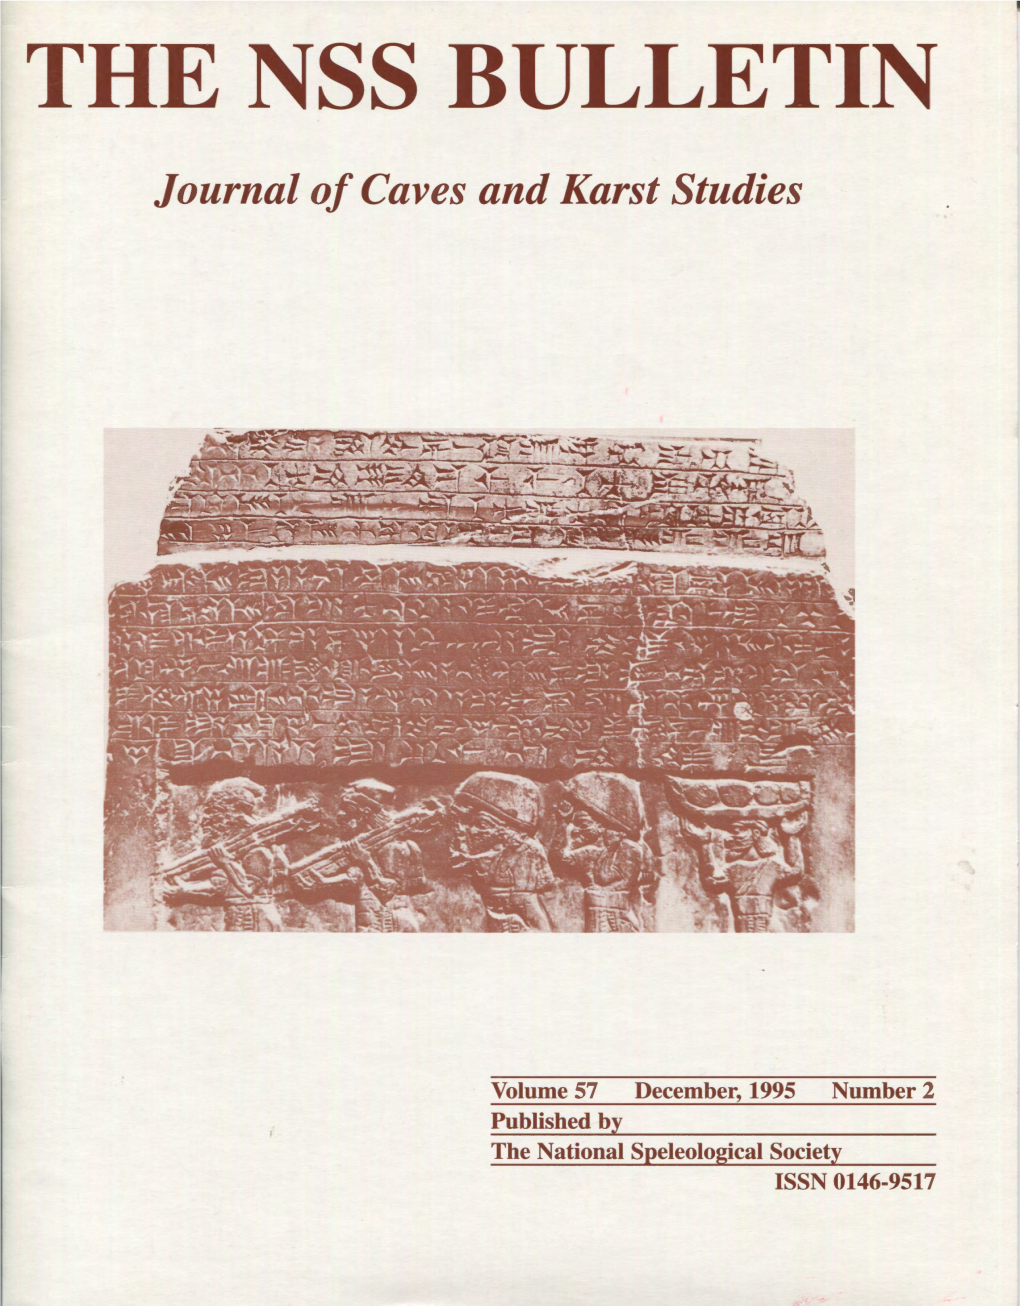 THE NSS BULLETIN Journal of Caves and Karst Studies